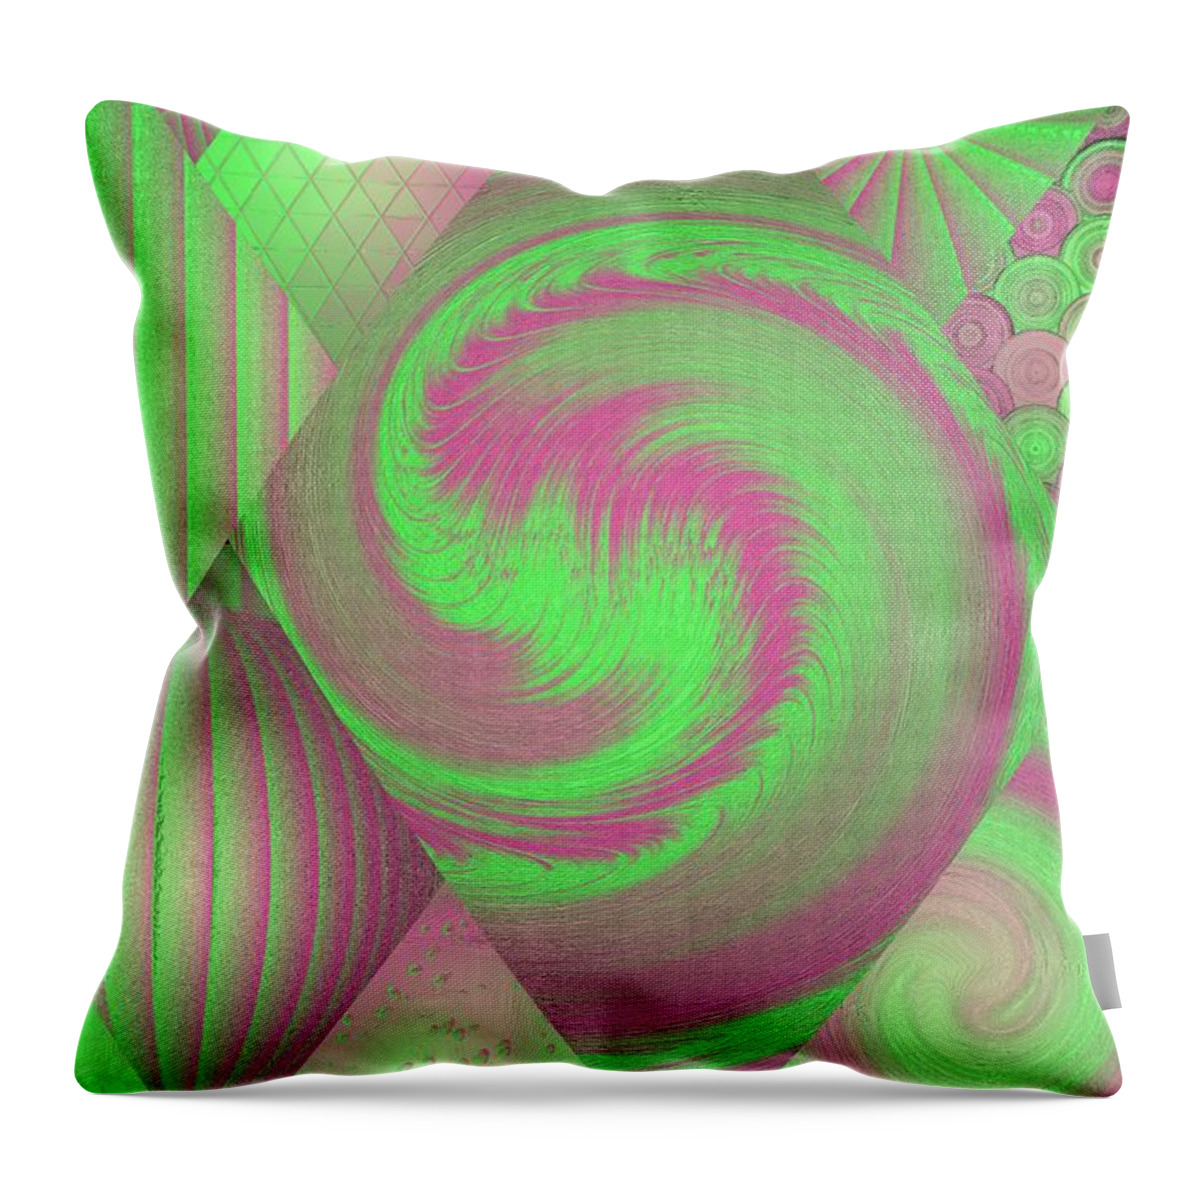 Collage Throw Pillow featuring the digital art Pink and Green Modern Collage by Rachel Hannah